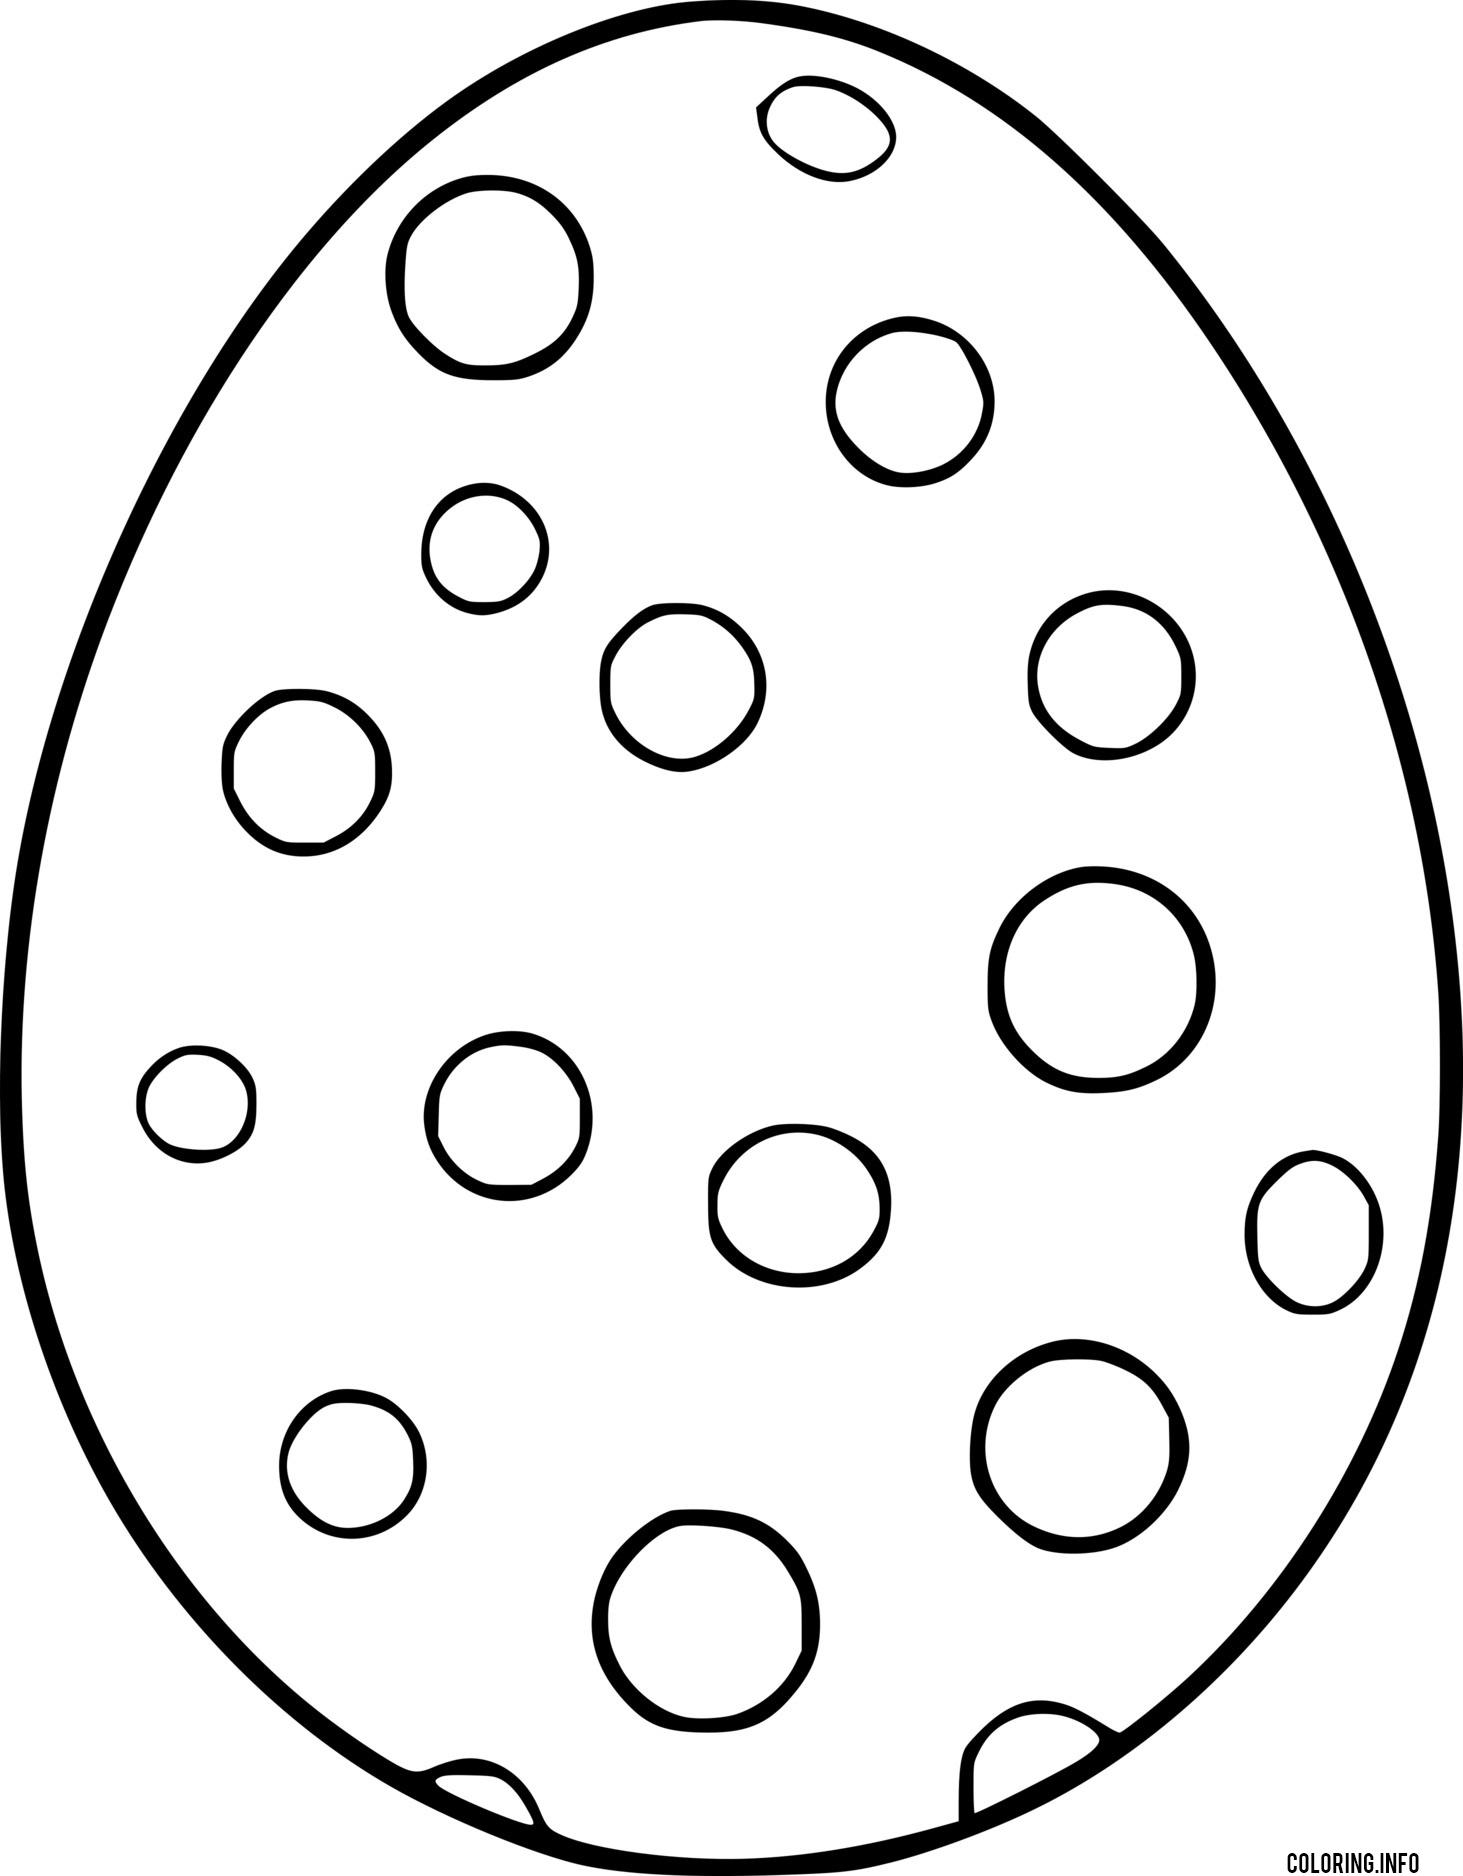 Easy Easter Egg With Circle Patterns coloring